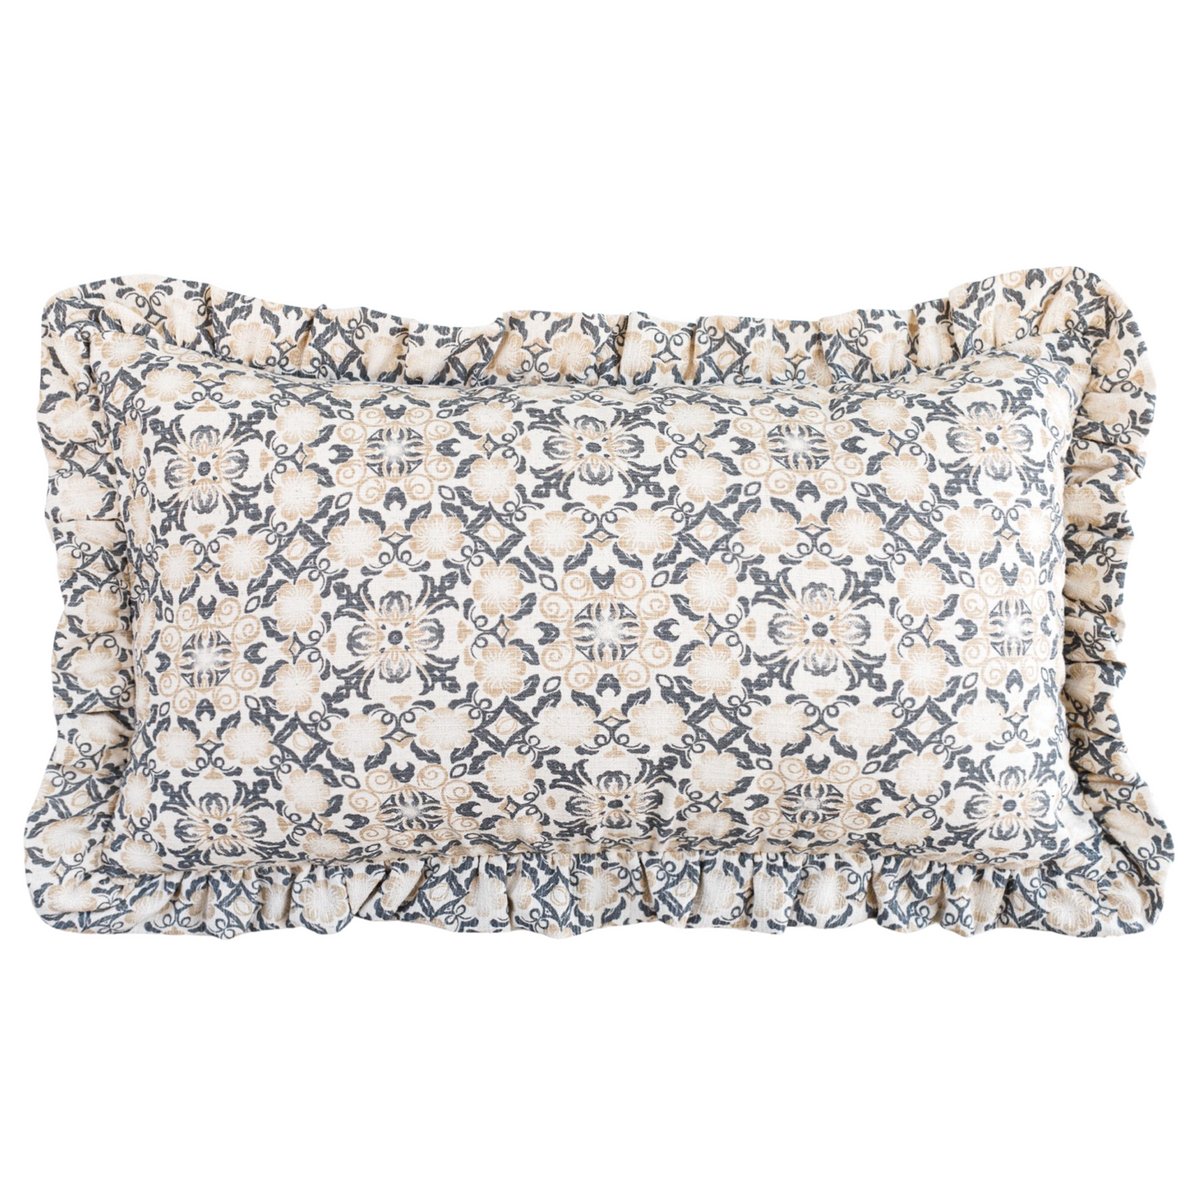 Marlee Ruffle Pillow Cover